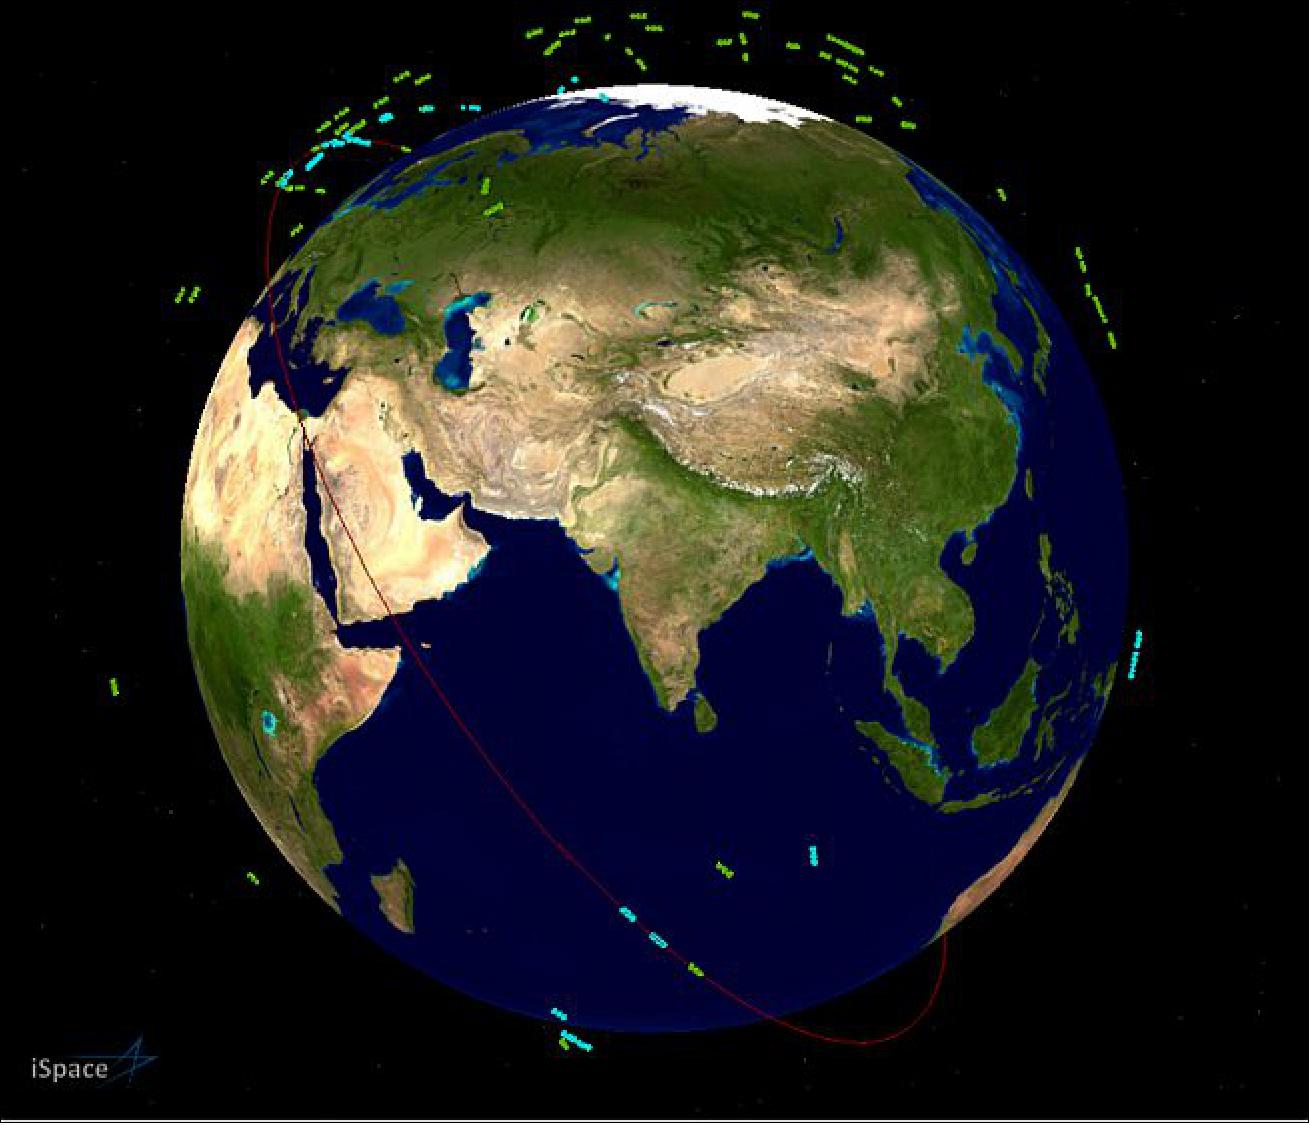 Figure 3: iSpace tracks thousands of space objects to allow users to characterize, recognize and respond appropriately to space events (image credit: Lockheed Martin iSpace)